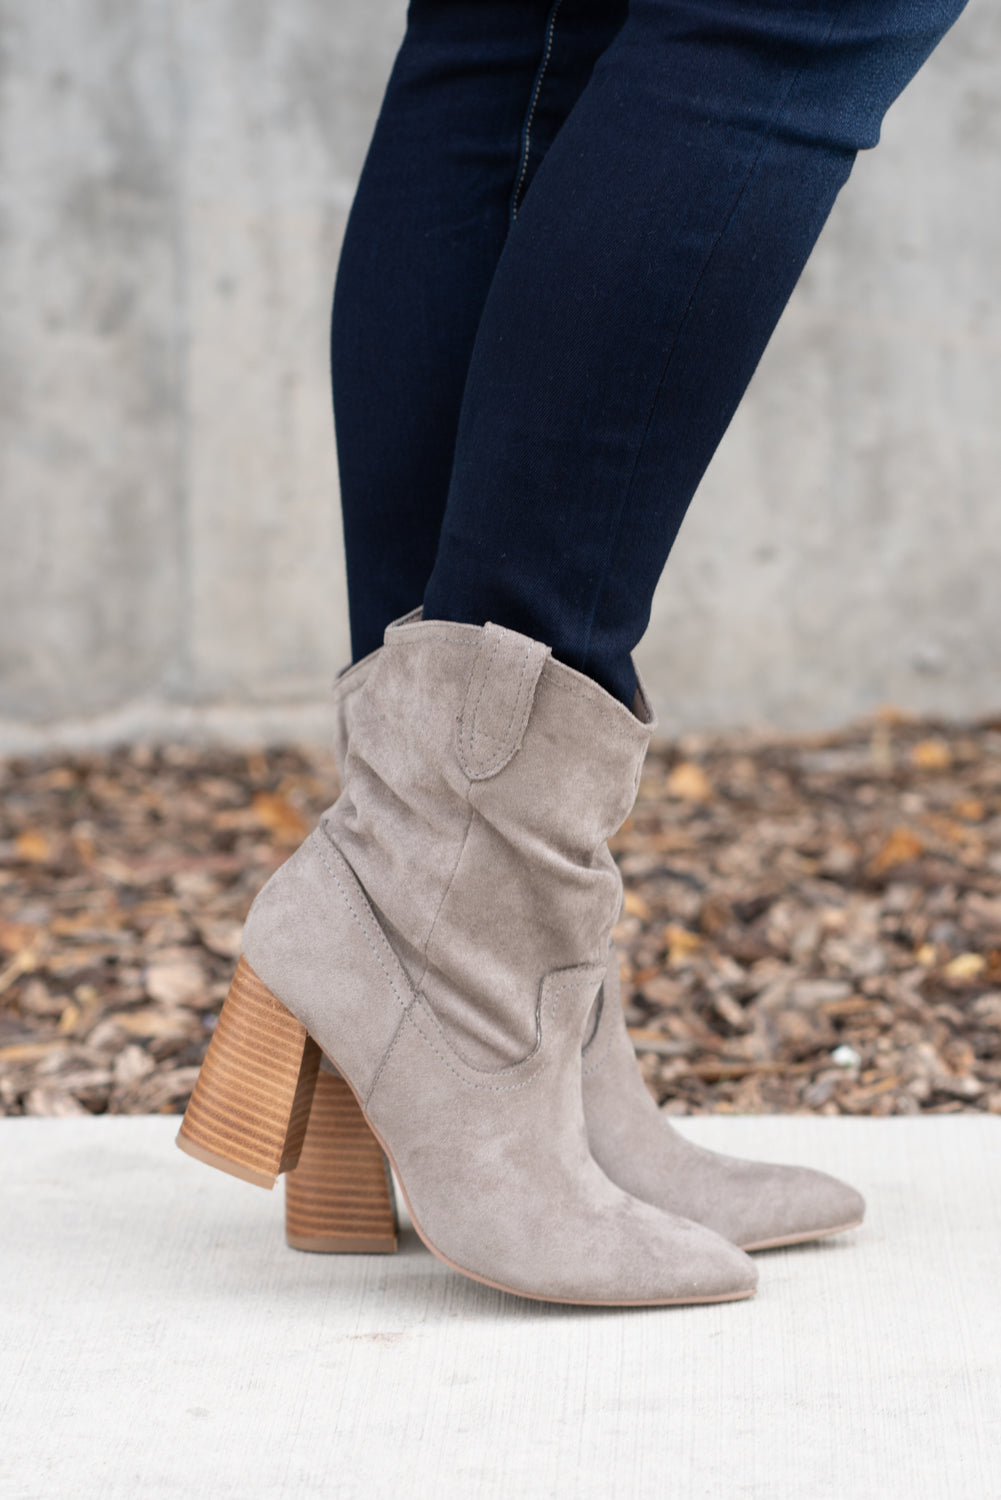 Boots by Mi.iM  This city-slick cowboy style bootie kicks it up a notch with a bold stacked heel. Crafted from manmade suede, this upper is completed with a slight slouch in the ankle. Finished on our signature padded foot bed, they're a must for all day comfort.  Man-made Upper Color: Grey Padded footbed Shaft Height: 5.75" Heel Height: 3.25" Opening: 12" Contact us for any additional measurements or sizing. 